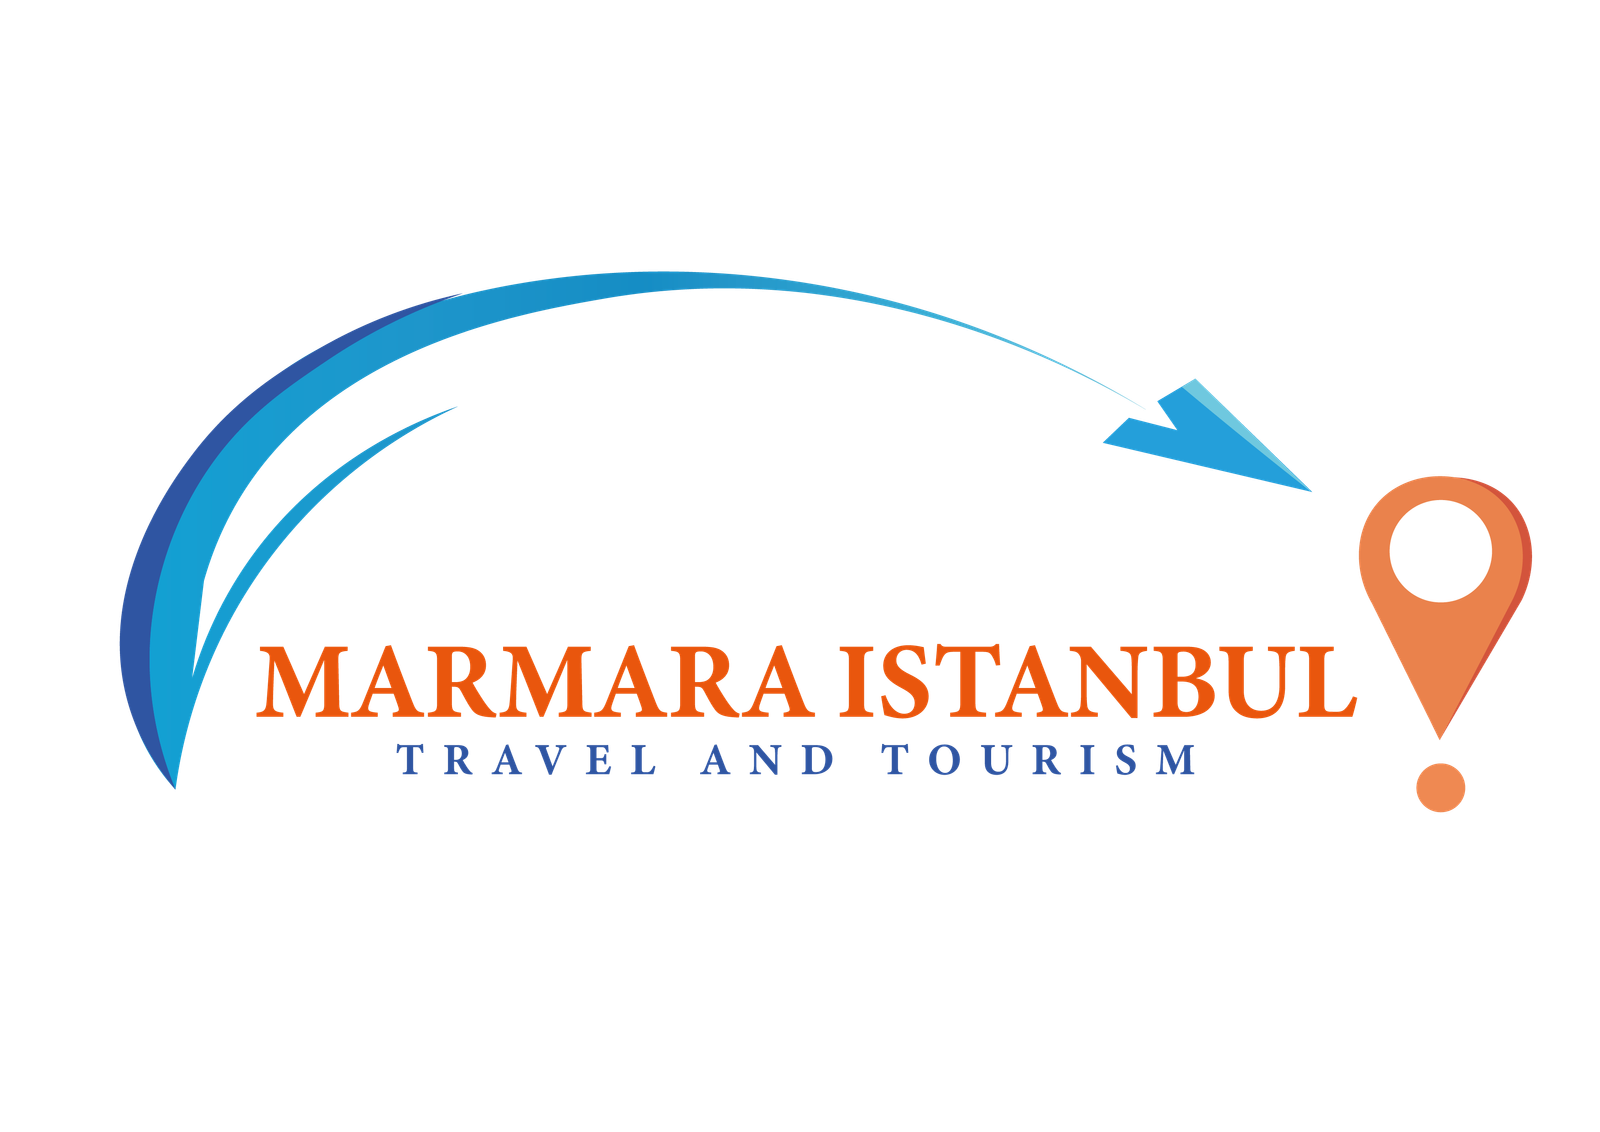 "marmara istanbul travel Soars with MADAC: Marketing Excellence in Action